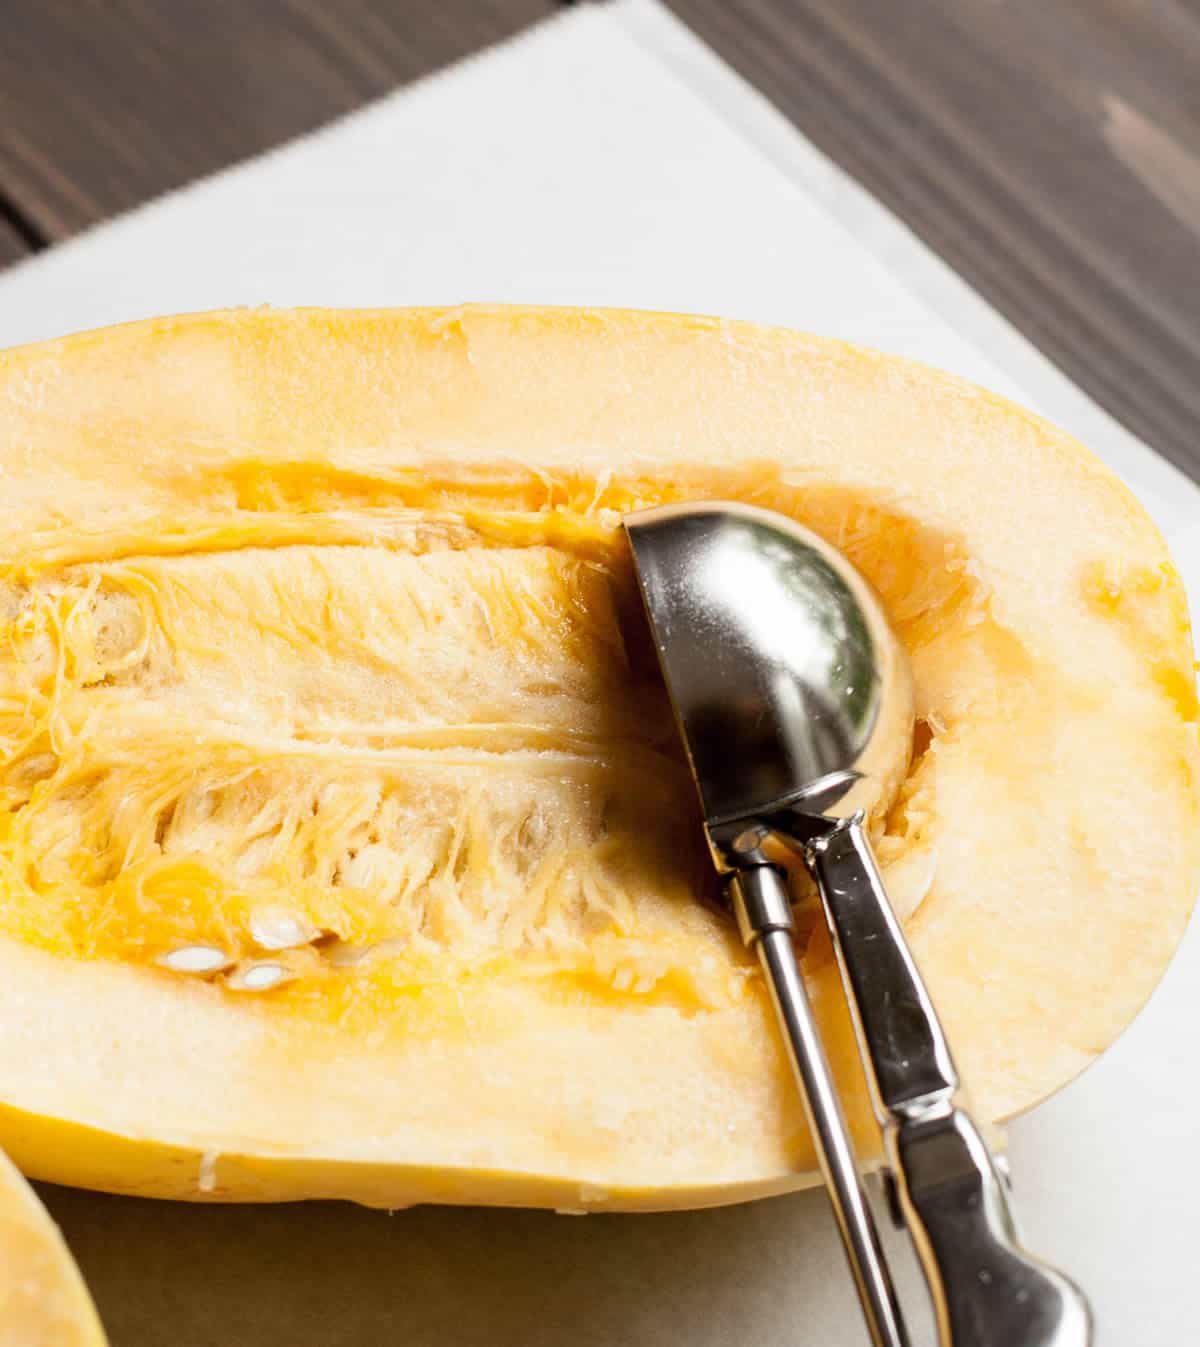 How to Cook Spaghetti Squash. This is an easy way to cook tender spaghetti squash. Try my secret tip that you do right after it comes out of the oven.